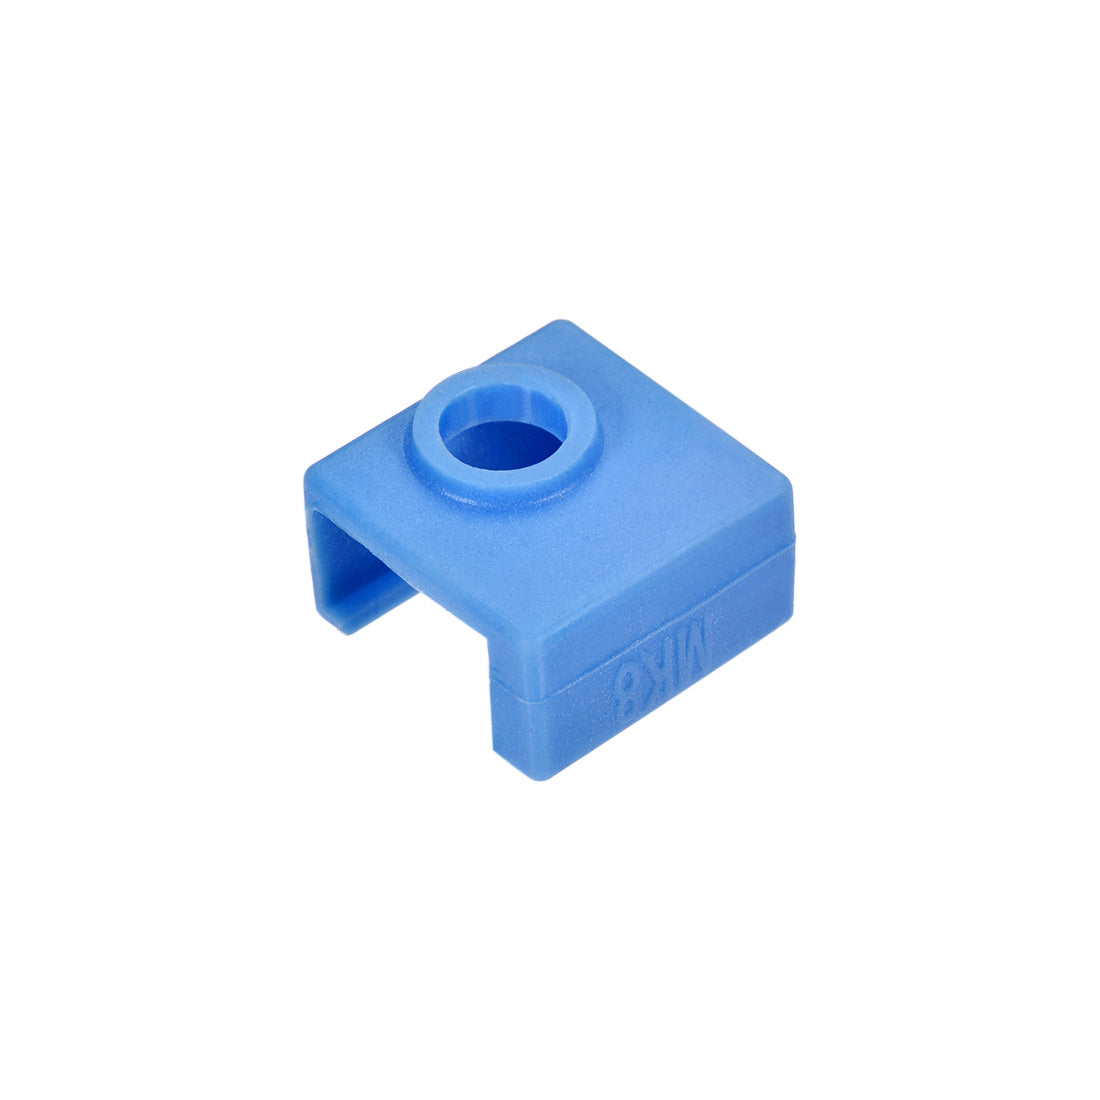 uxcell Uxcell 3D Printer Heater Block Silicone Cover MK7/MK8/MK9 Blue 3pcs